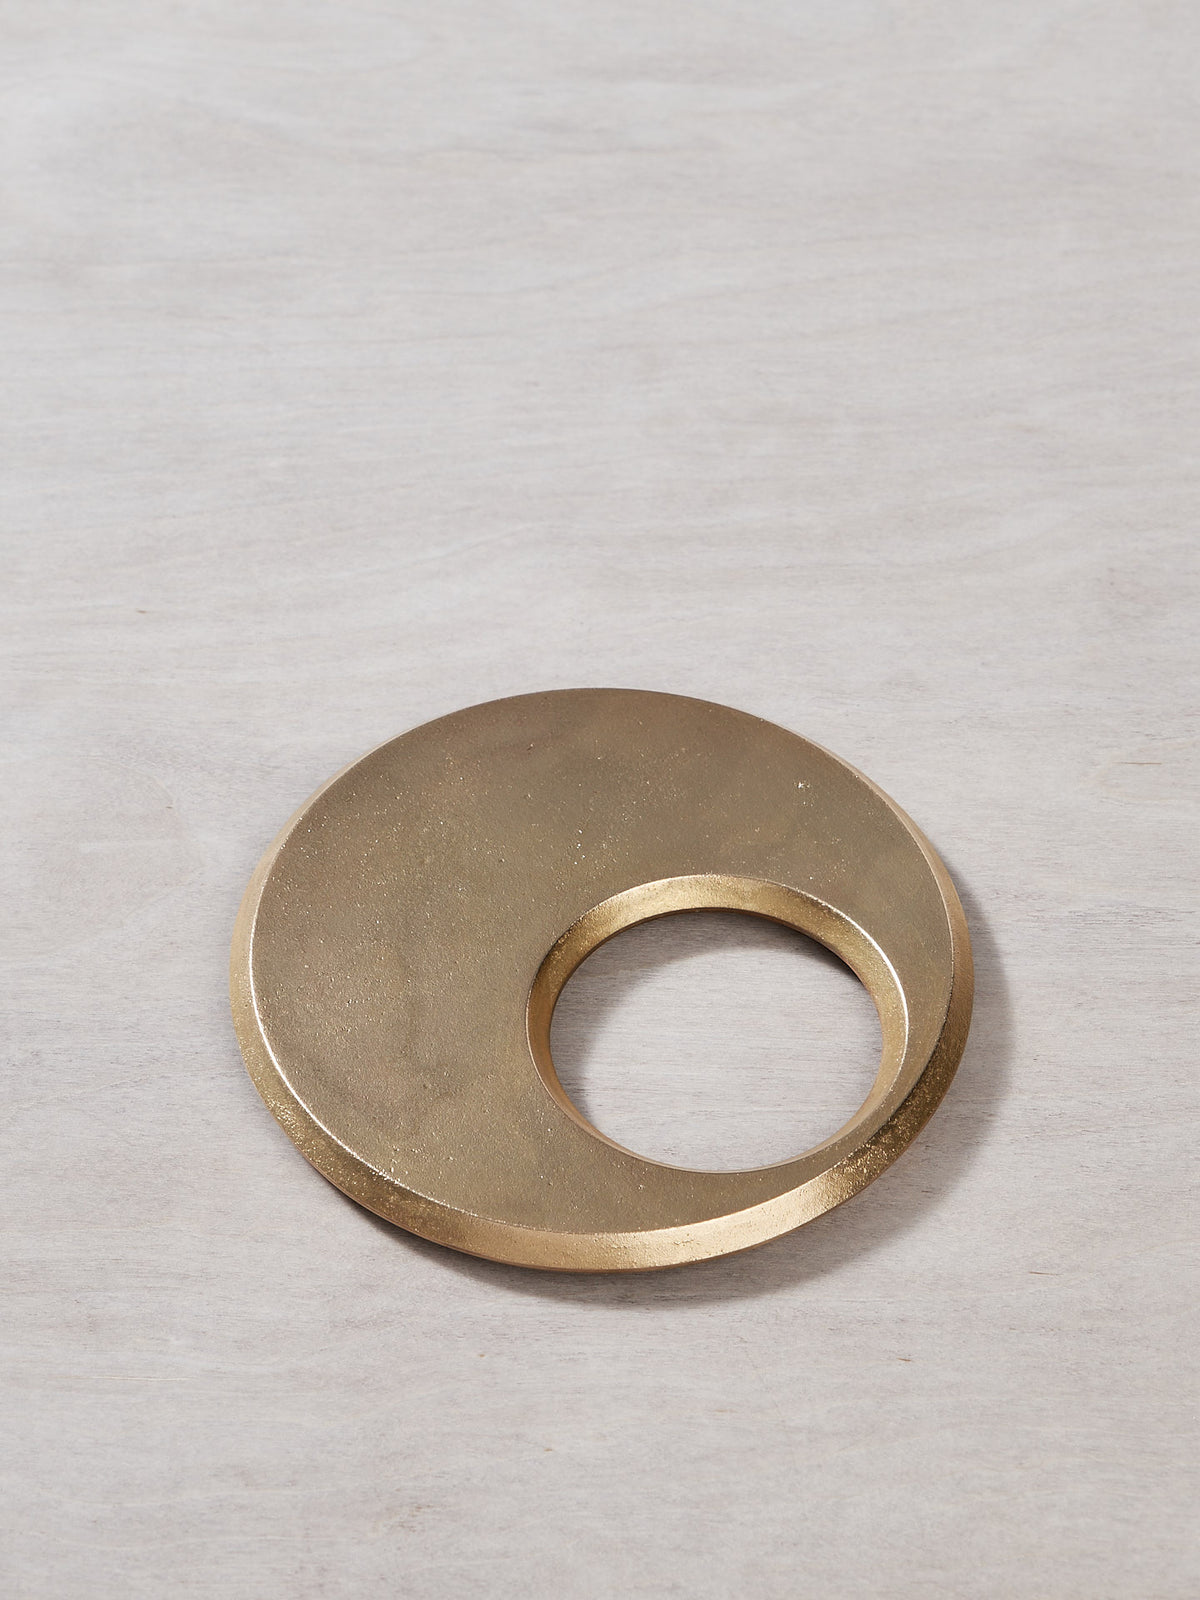 A Moon Trivet – Solid Brass by Futagami on a wooden surface.